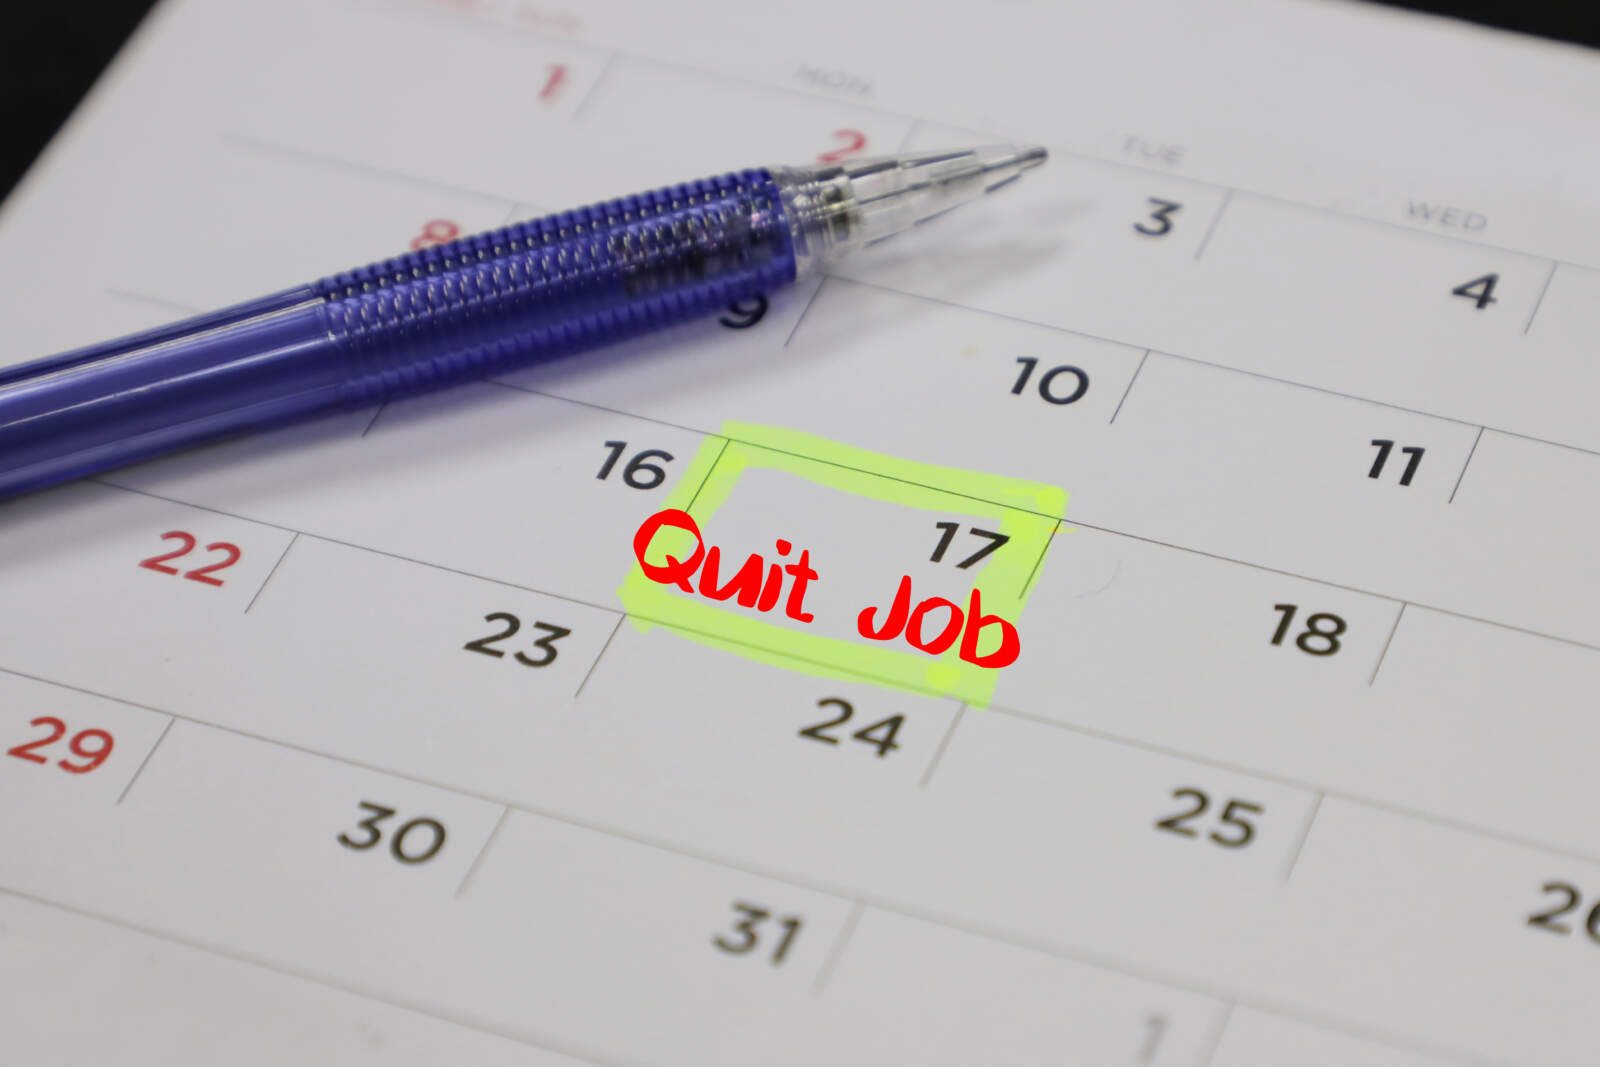 how to quit your job